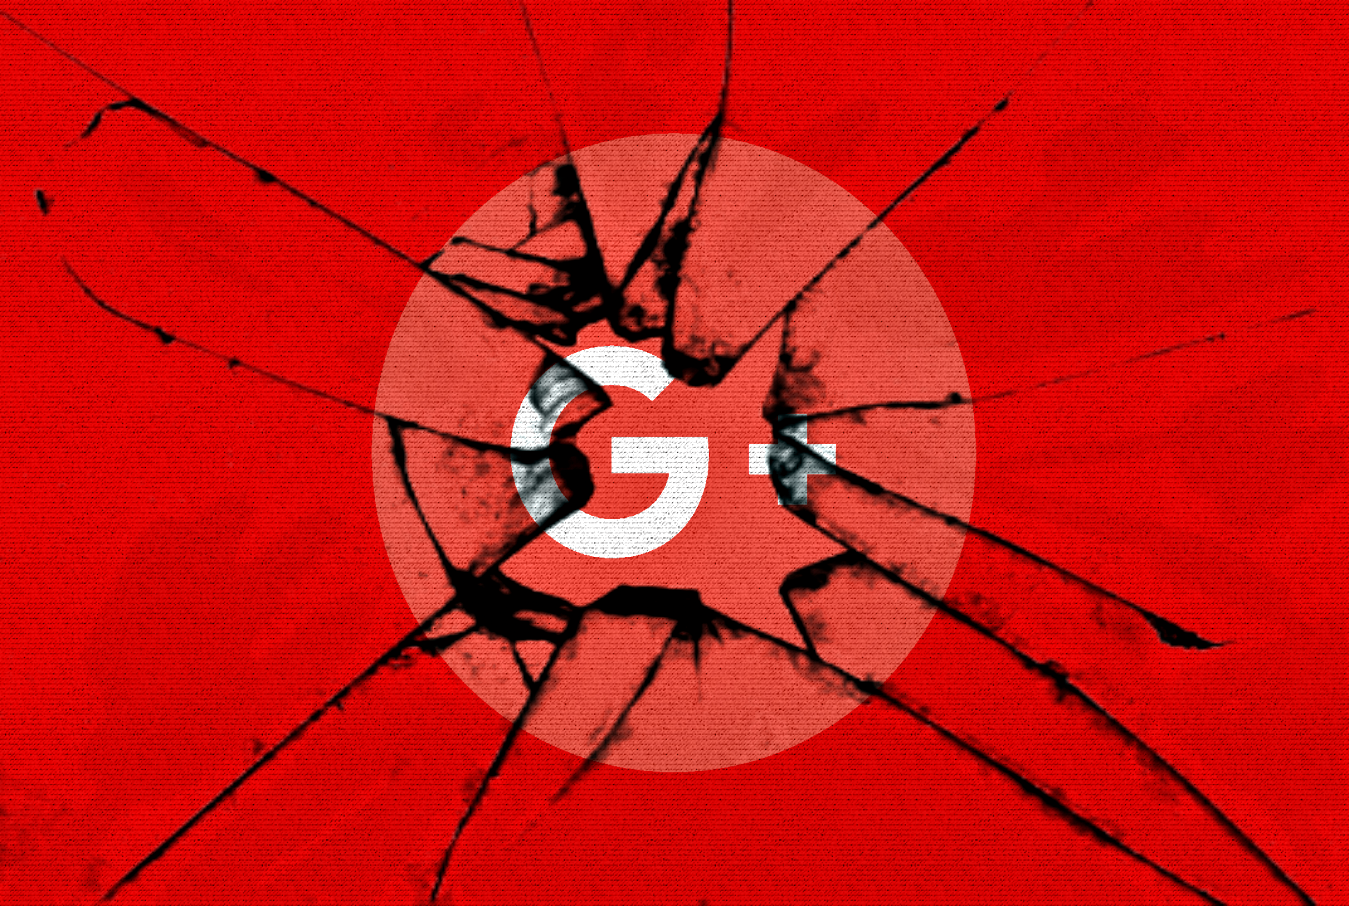 Google Plus hit by another breach - Data of 52.5 million users exposed